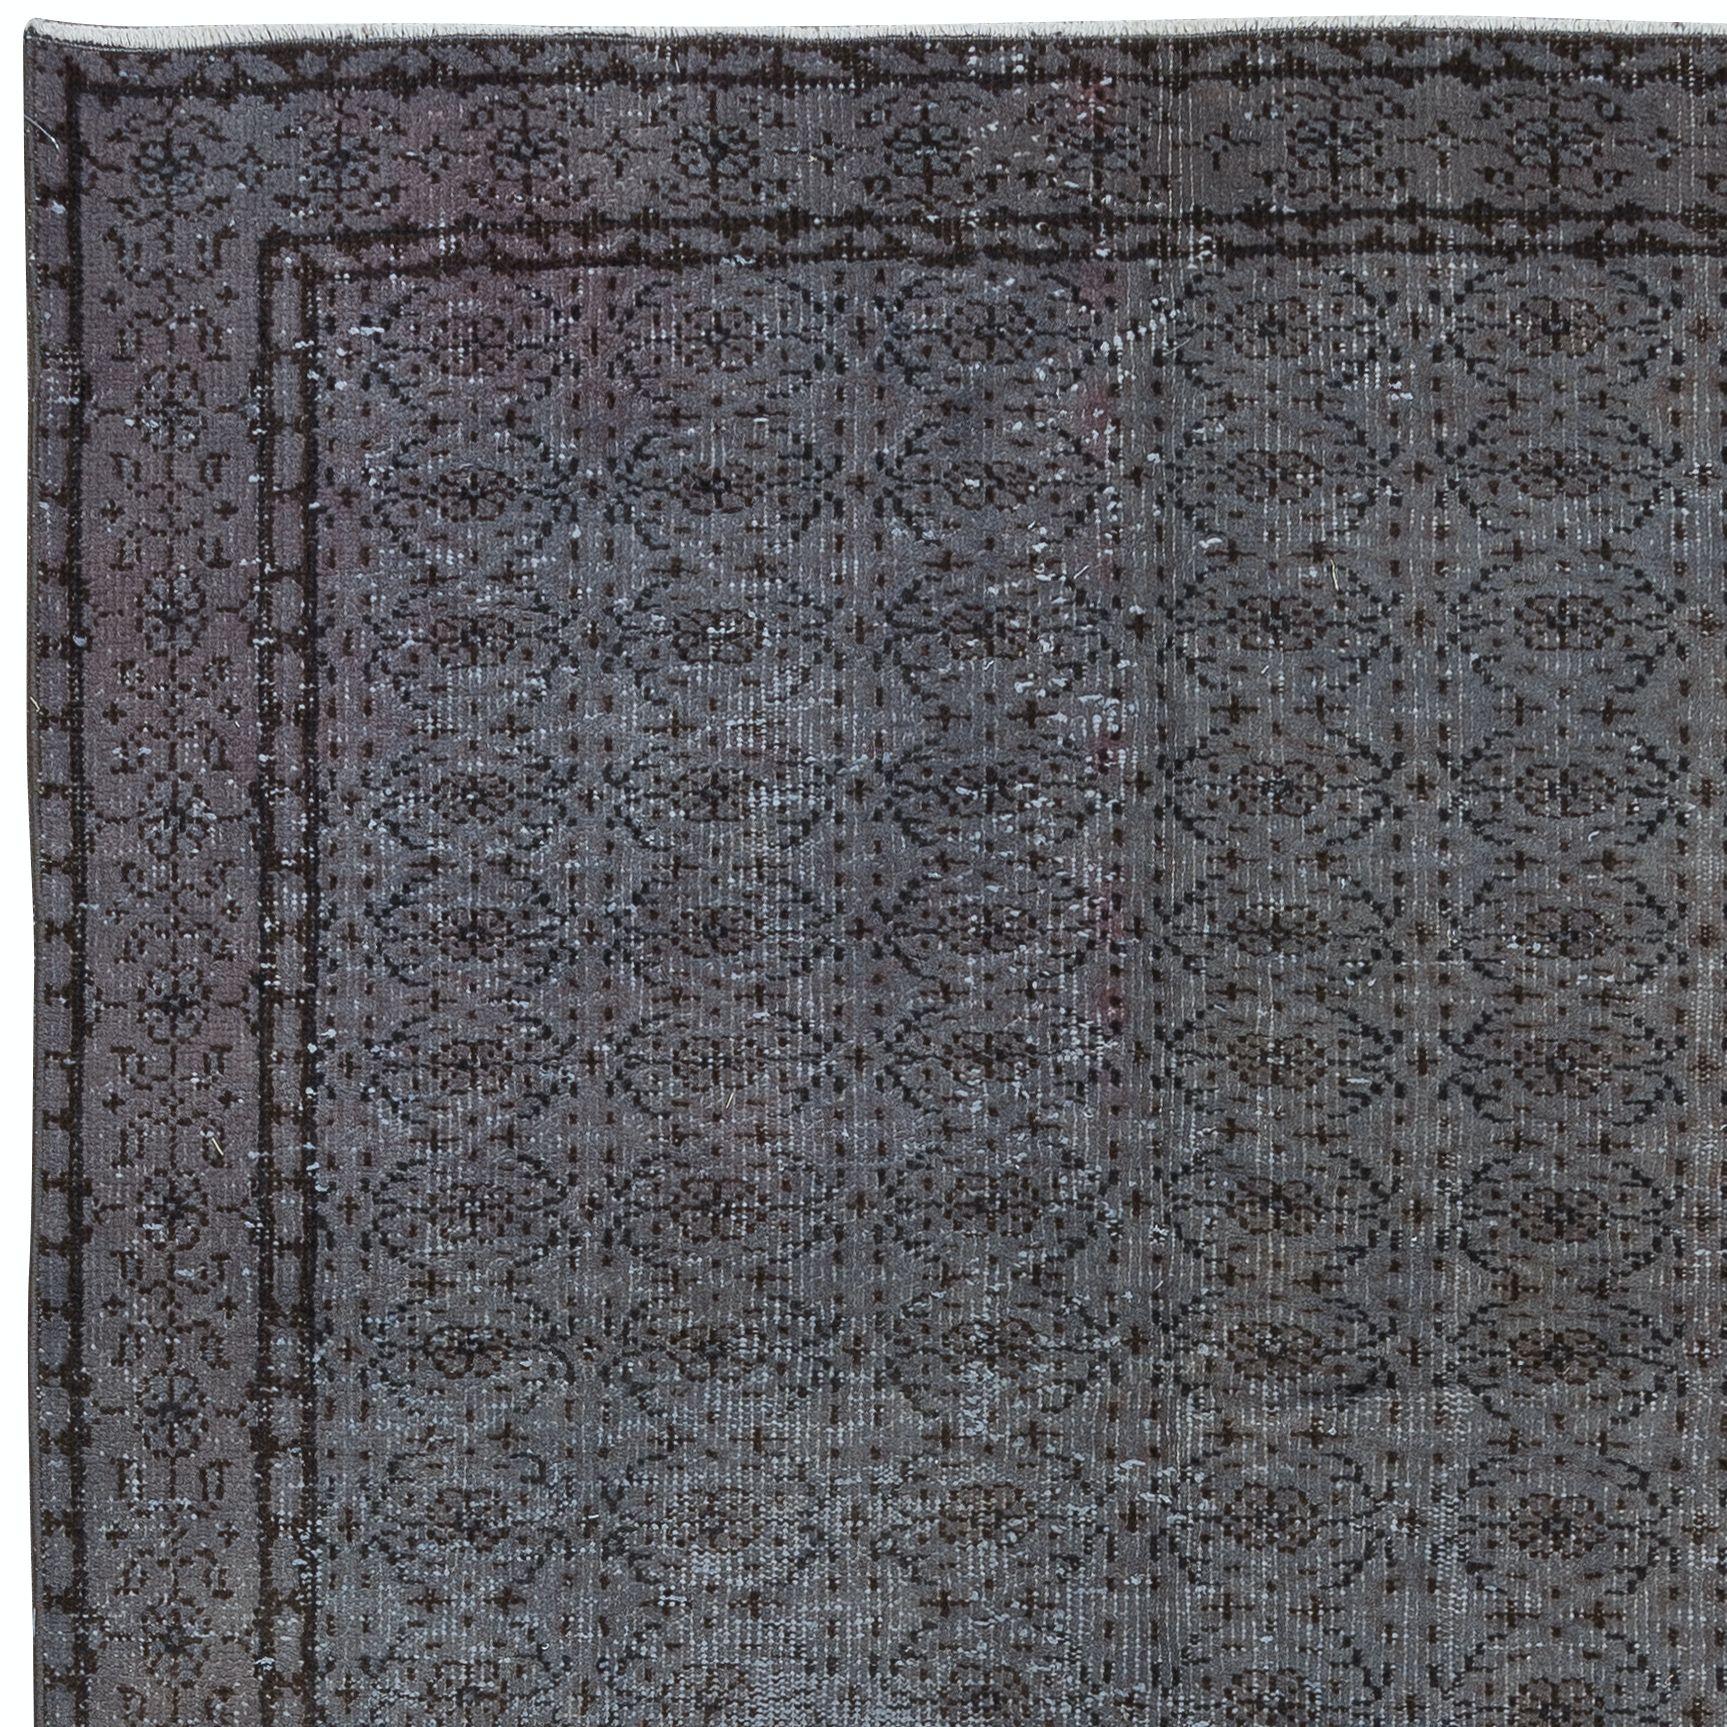 Hand-Woven 5.7x8.4 Ft Modern Handmade Turkish Gray Indoor-Outdoor Rug with Floral Design For Sale